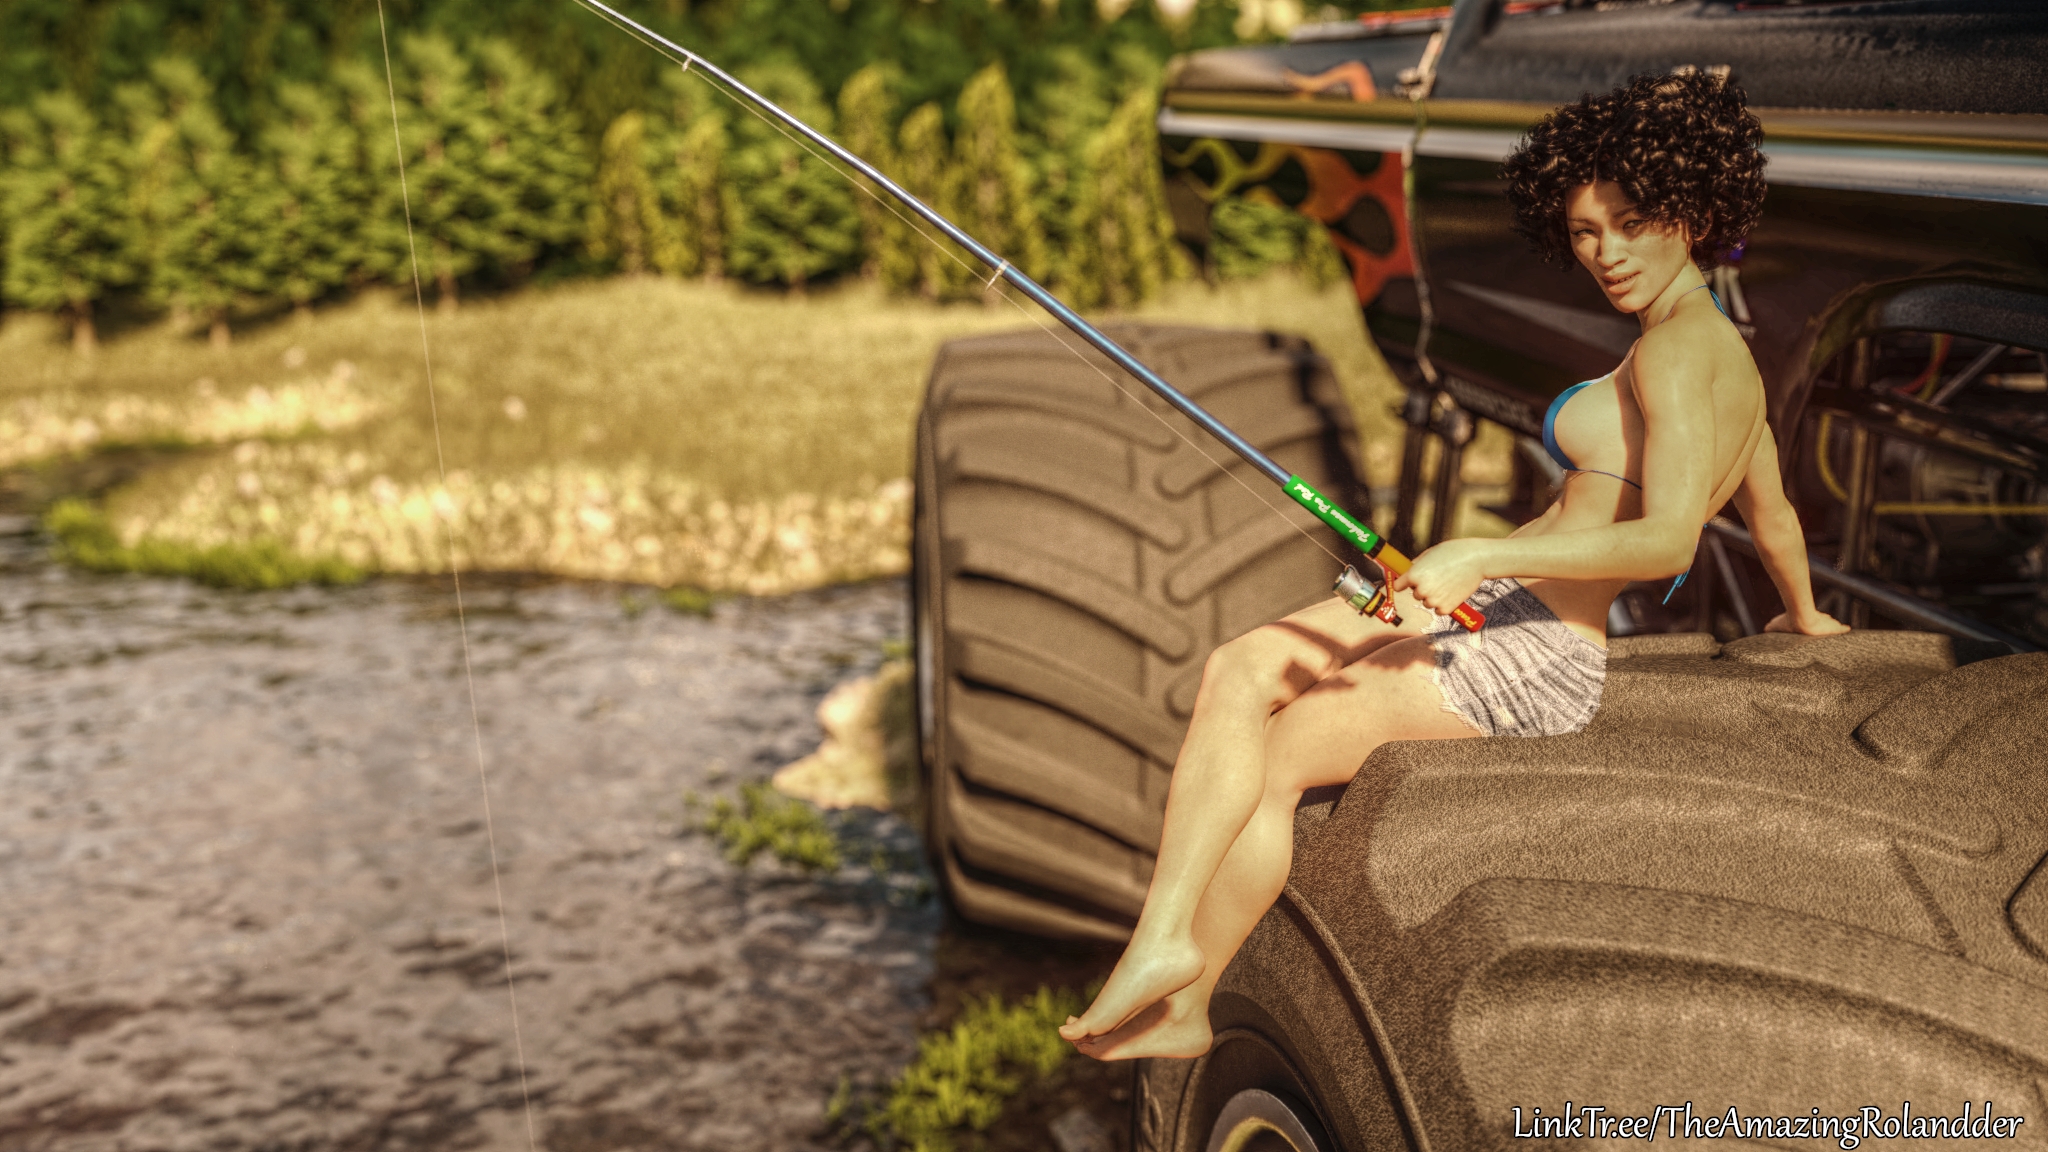 Woman fishing with a fishing pole while reclining on a monster truck s tire.